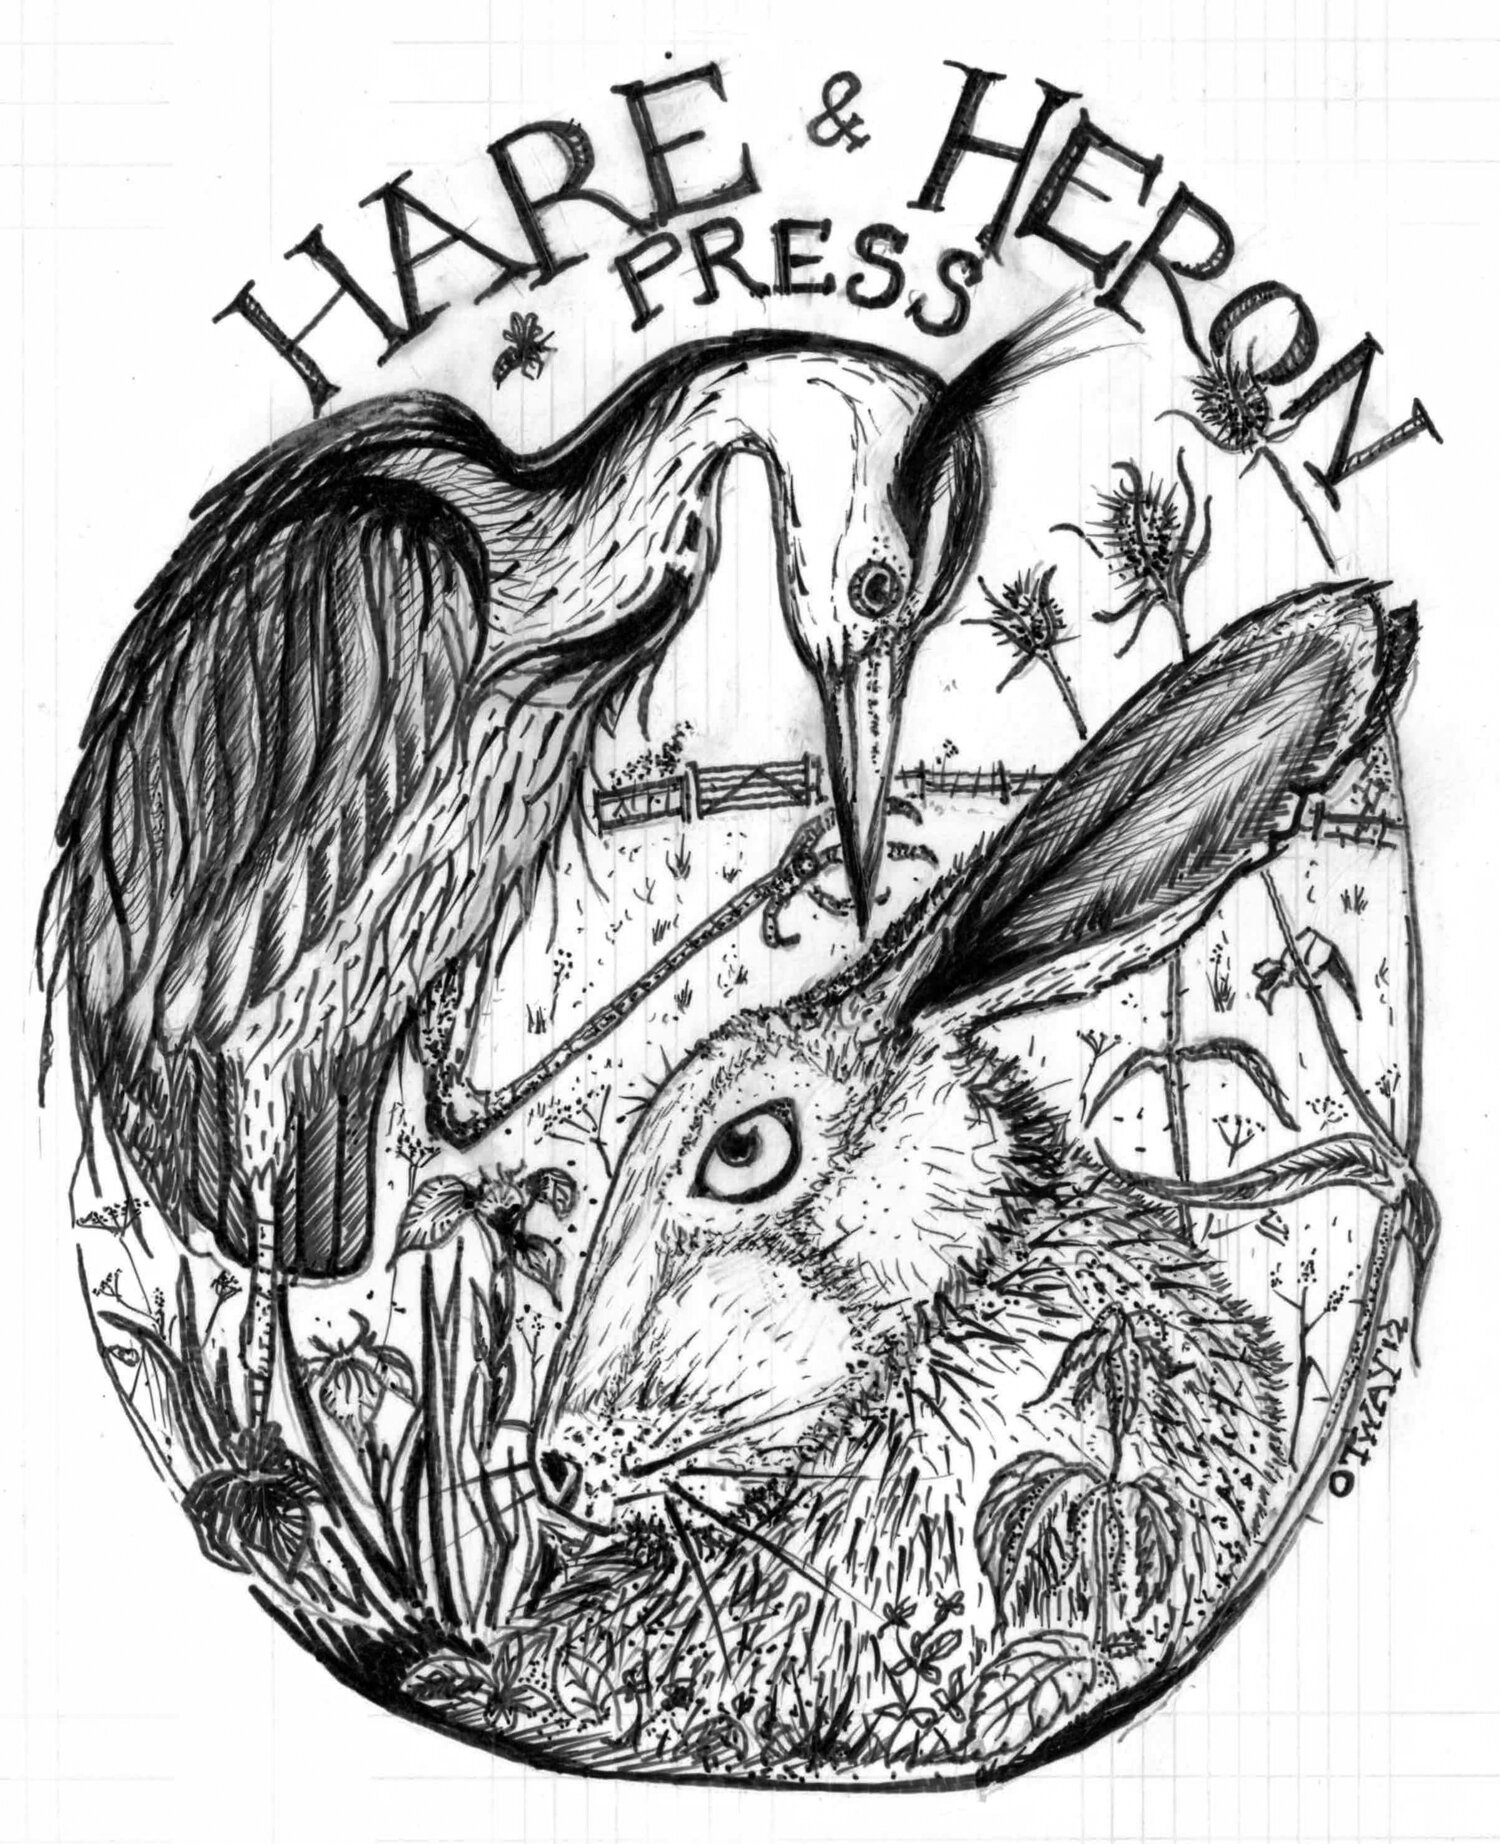 Hare and Heron Press | Children's and Adult's Books